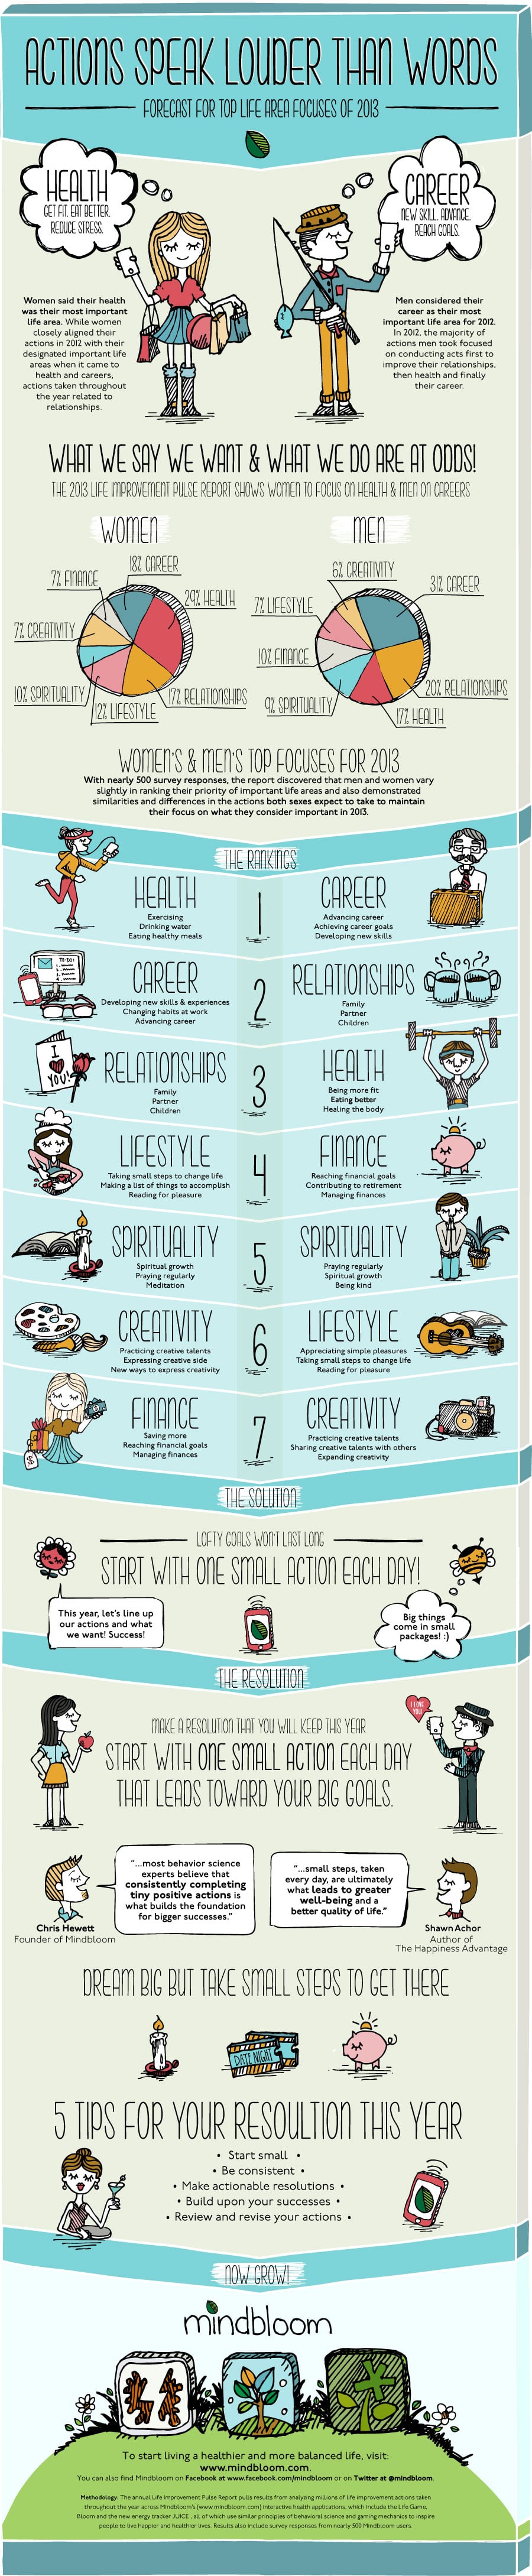 What’s Important To Men & Women vs. What We Say [Infographic]